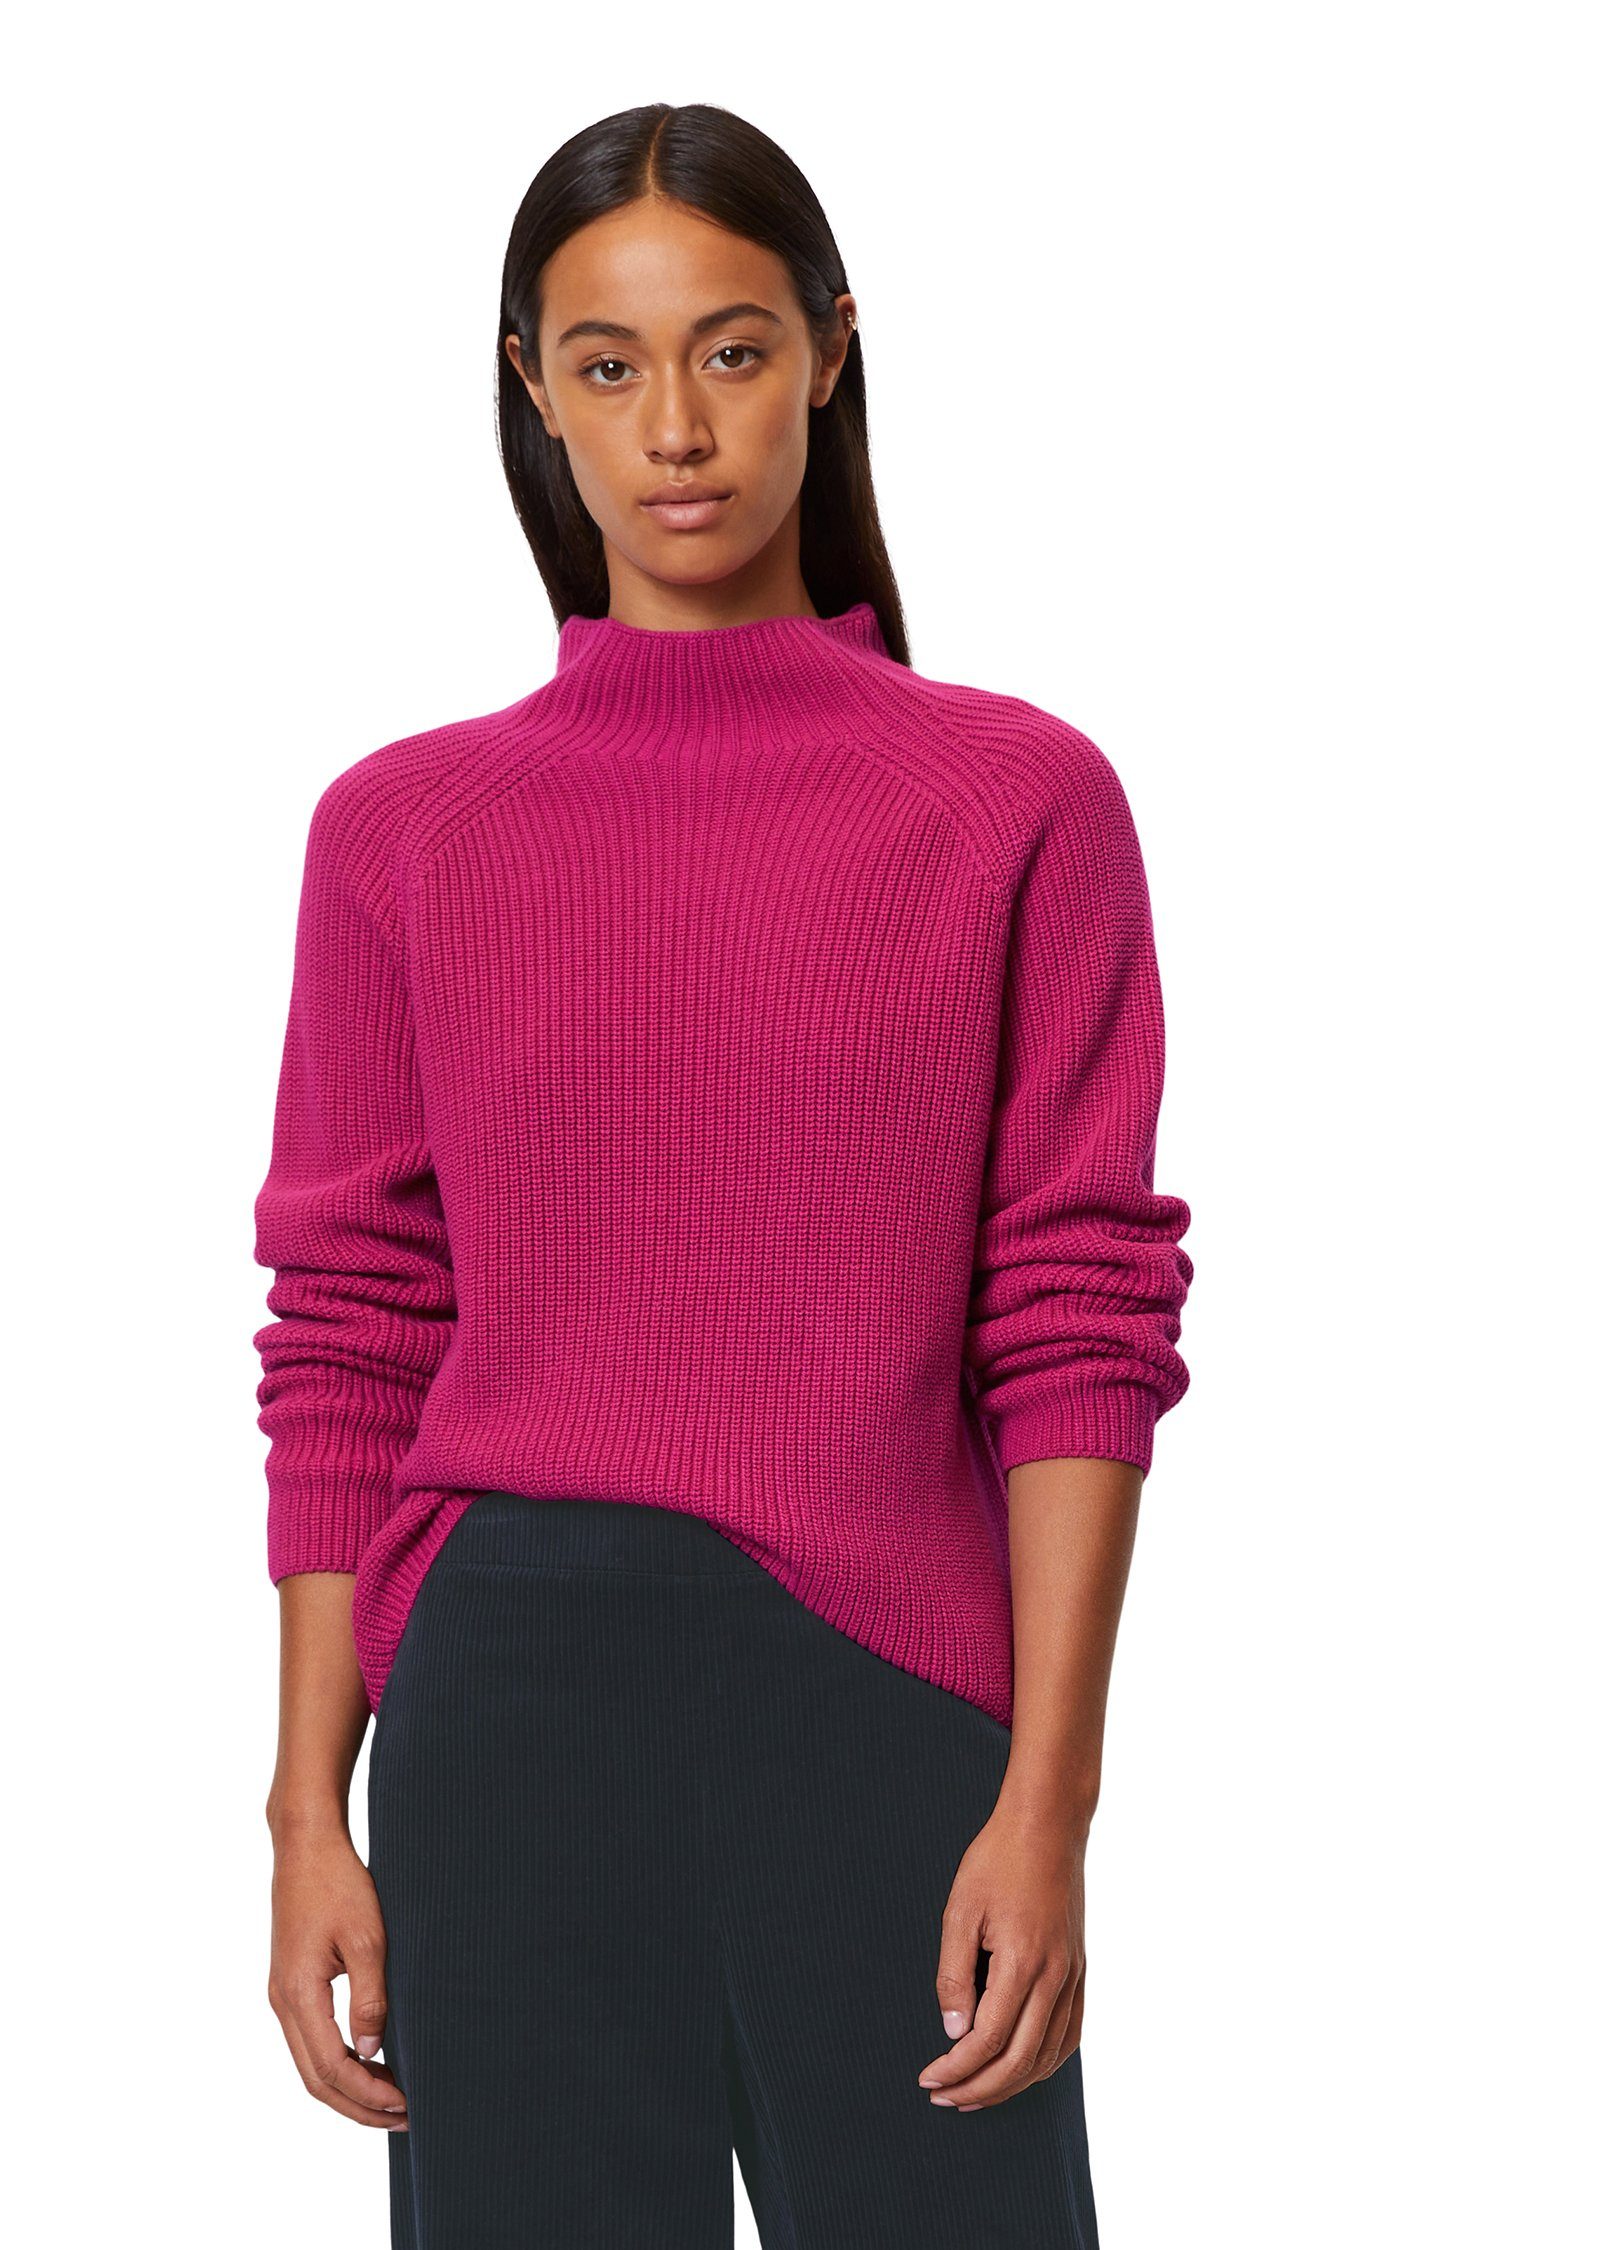 Marc O'Polo Strickpullover vibrant pink